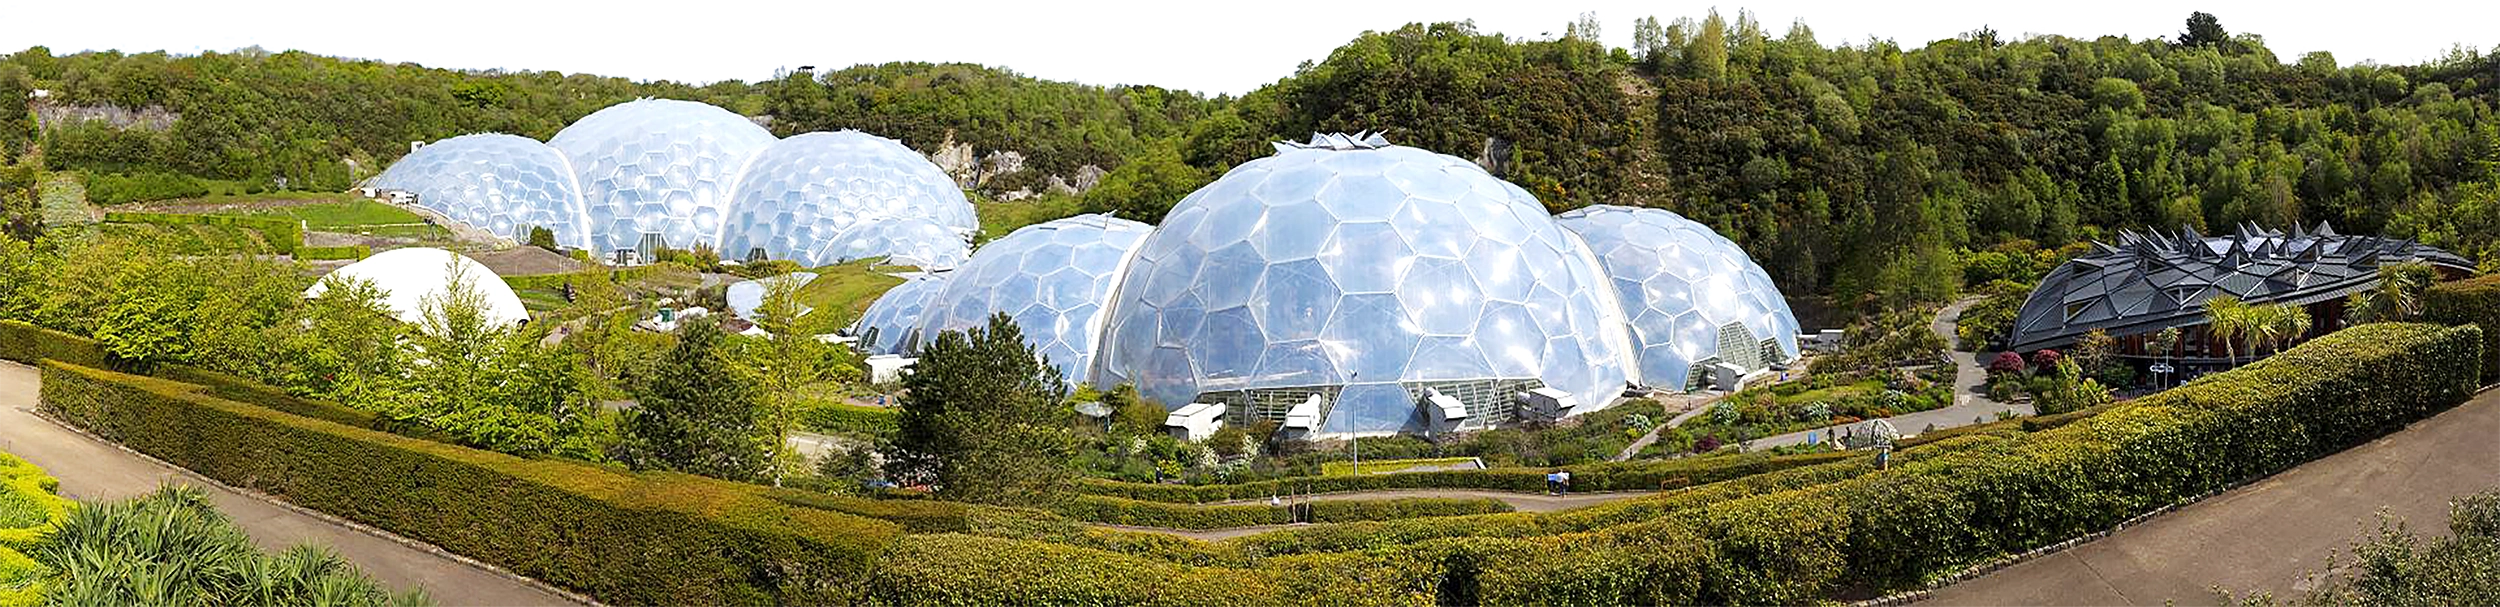 Eden Project biomes aerial shot